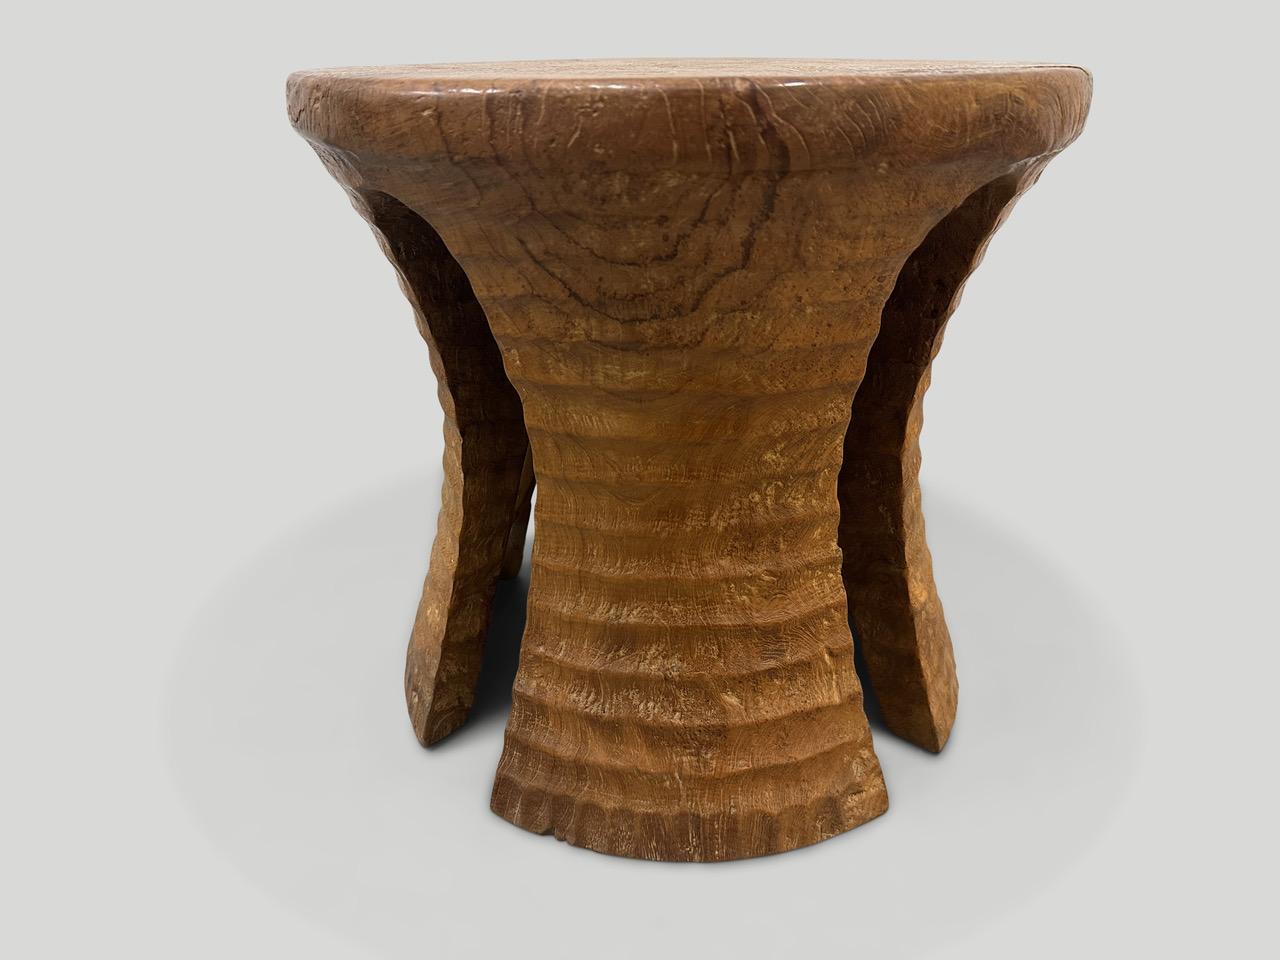 Contemporary Andrianna Shamaris Sculptural Teak Wood Side Table or Stool For Sale